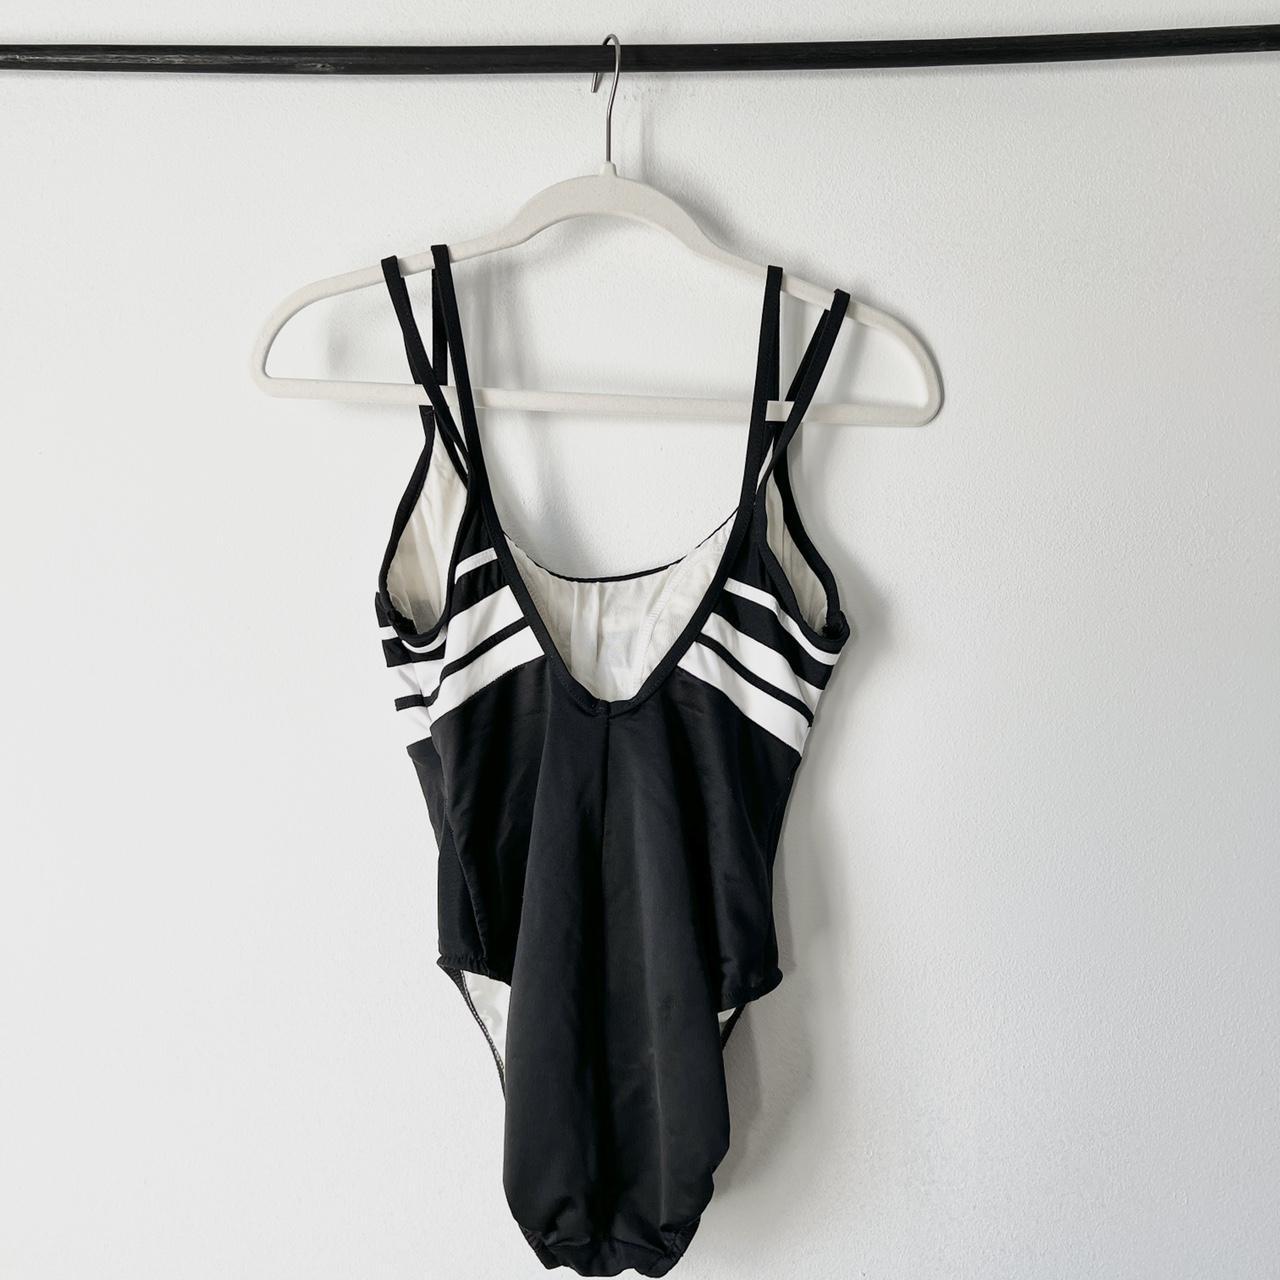 Product Image 2 - Vintage Miraclesuit one piece swimsuit

Marked